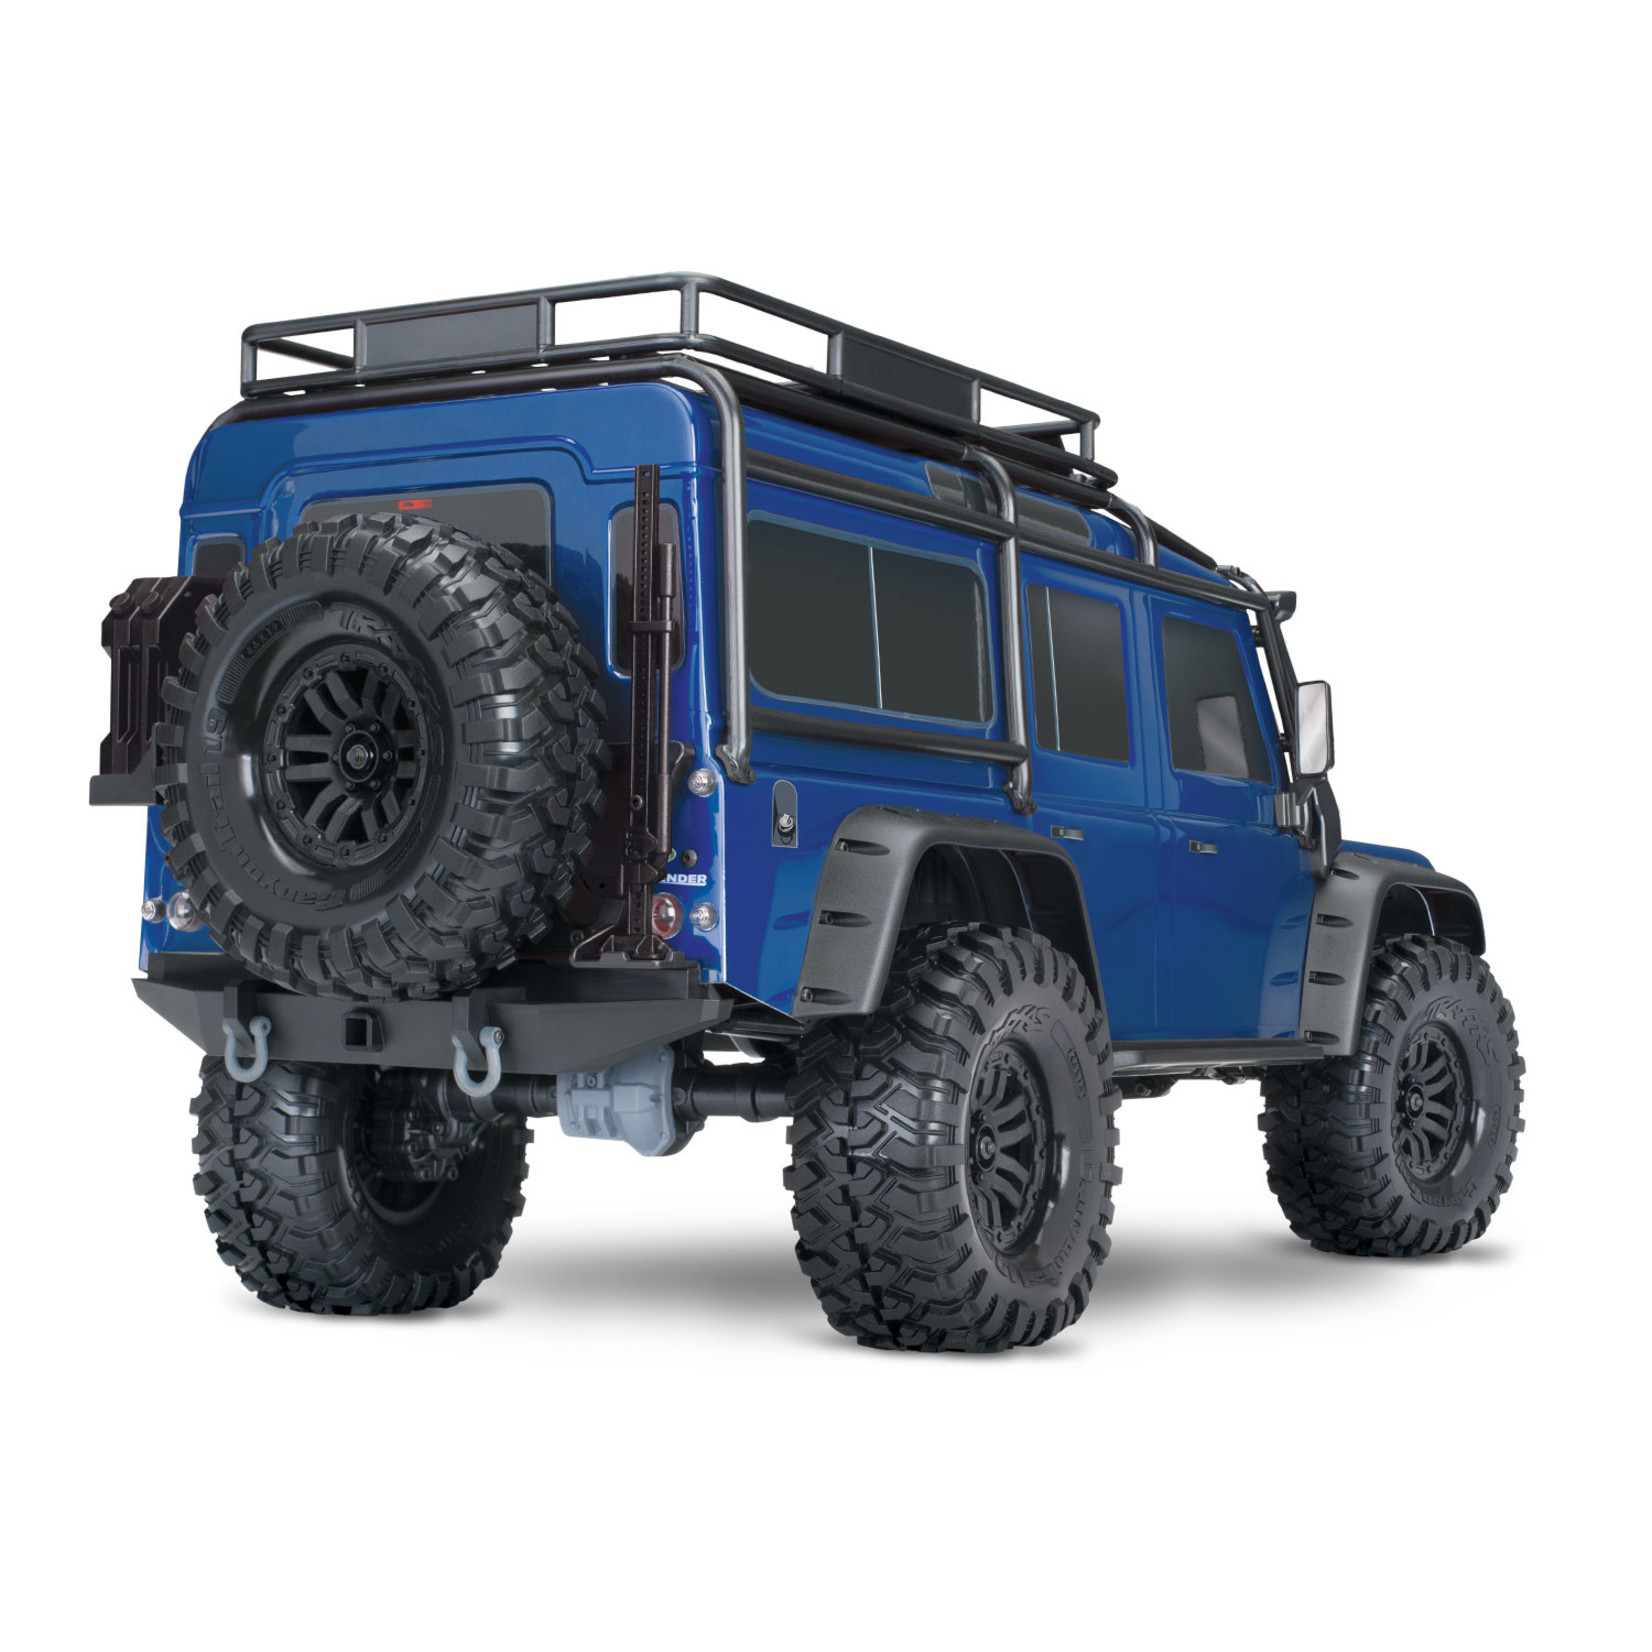 Traxxas TRX-4 Scale and Trail Crawler with Land Rover Defender Body: 1/10 Scale 4WD Electric Trail Truck